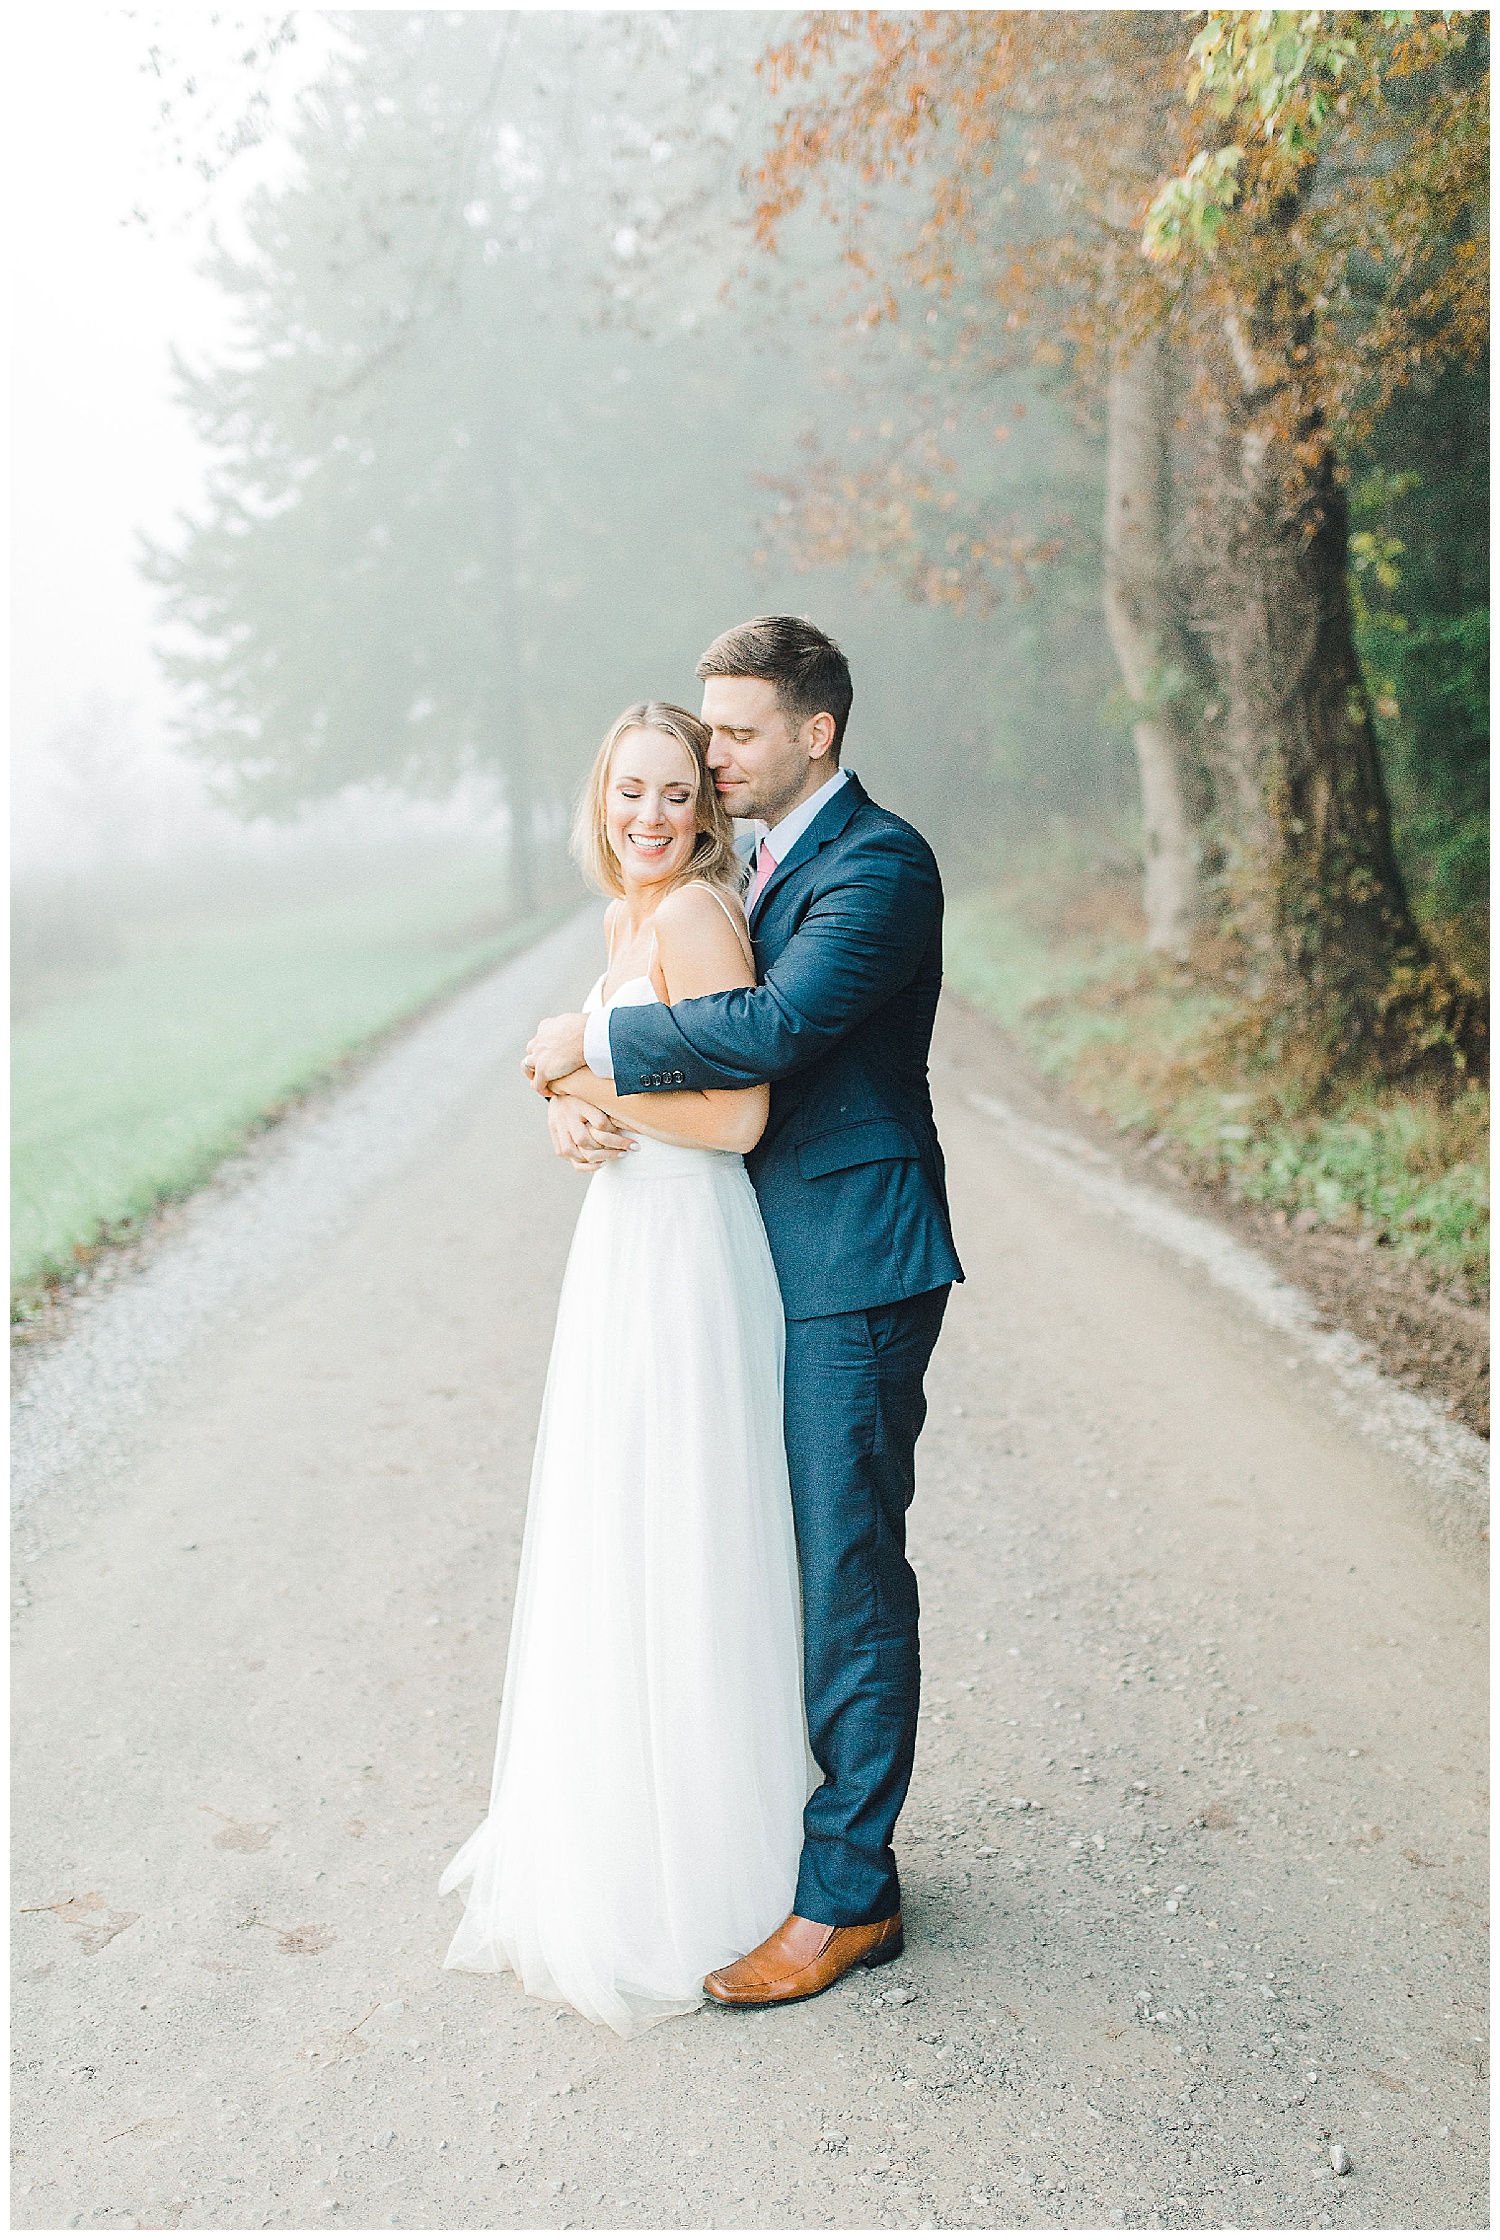 Emma Rose Company recently got to travel all the way to Nashville to photograph the most beautiful post-wedding bride and groom portraits in the Great Smoky Mountains with a gorgeous couple! Nashville wedding inspiration at it's finest._0020.jpg